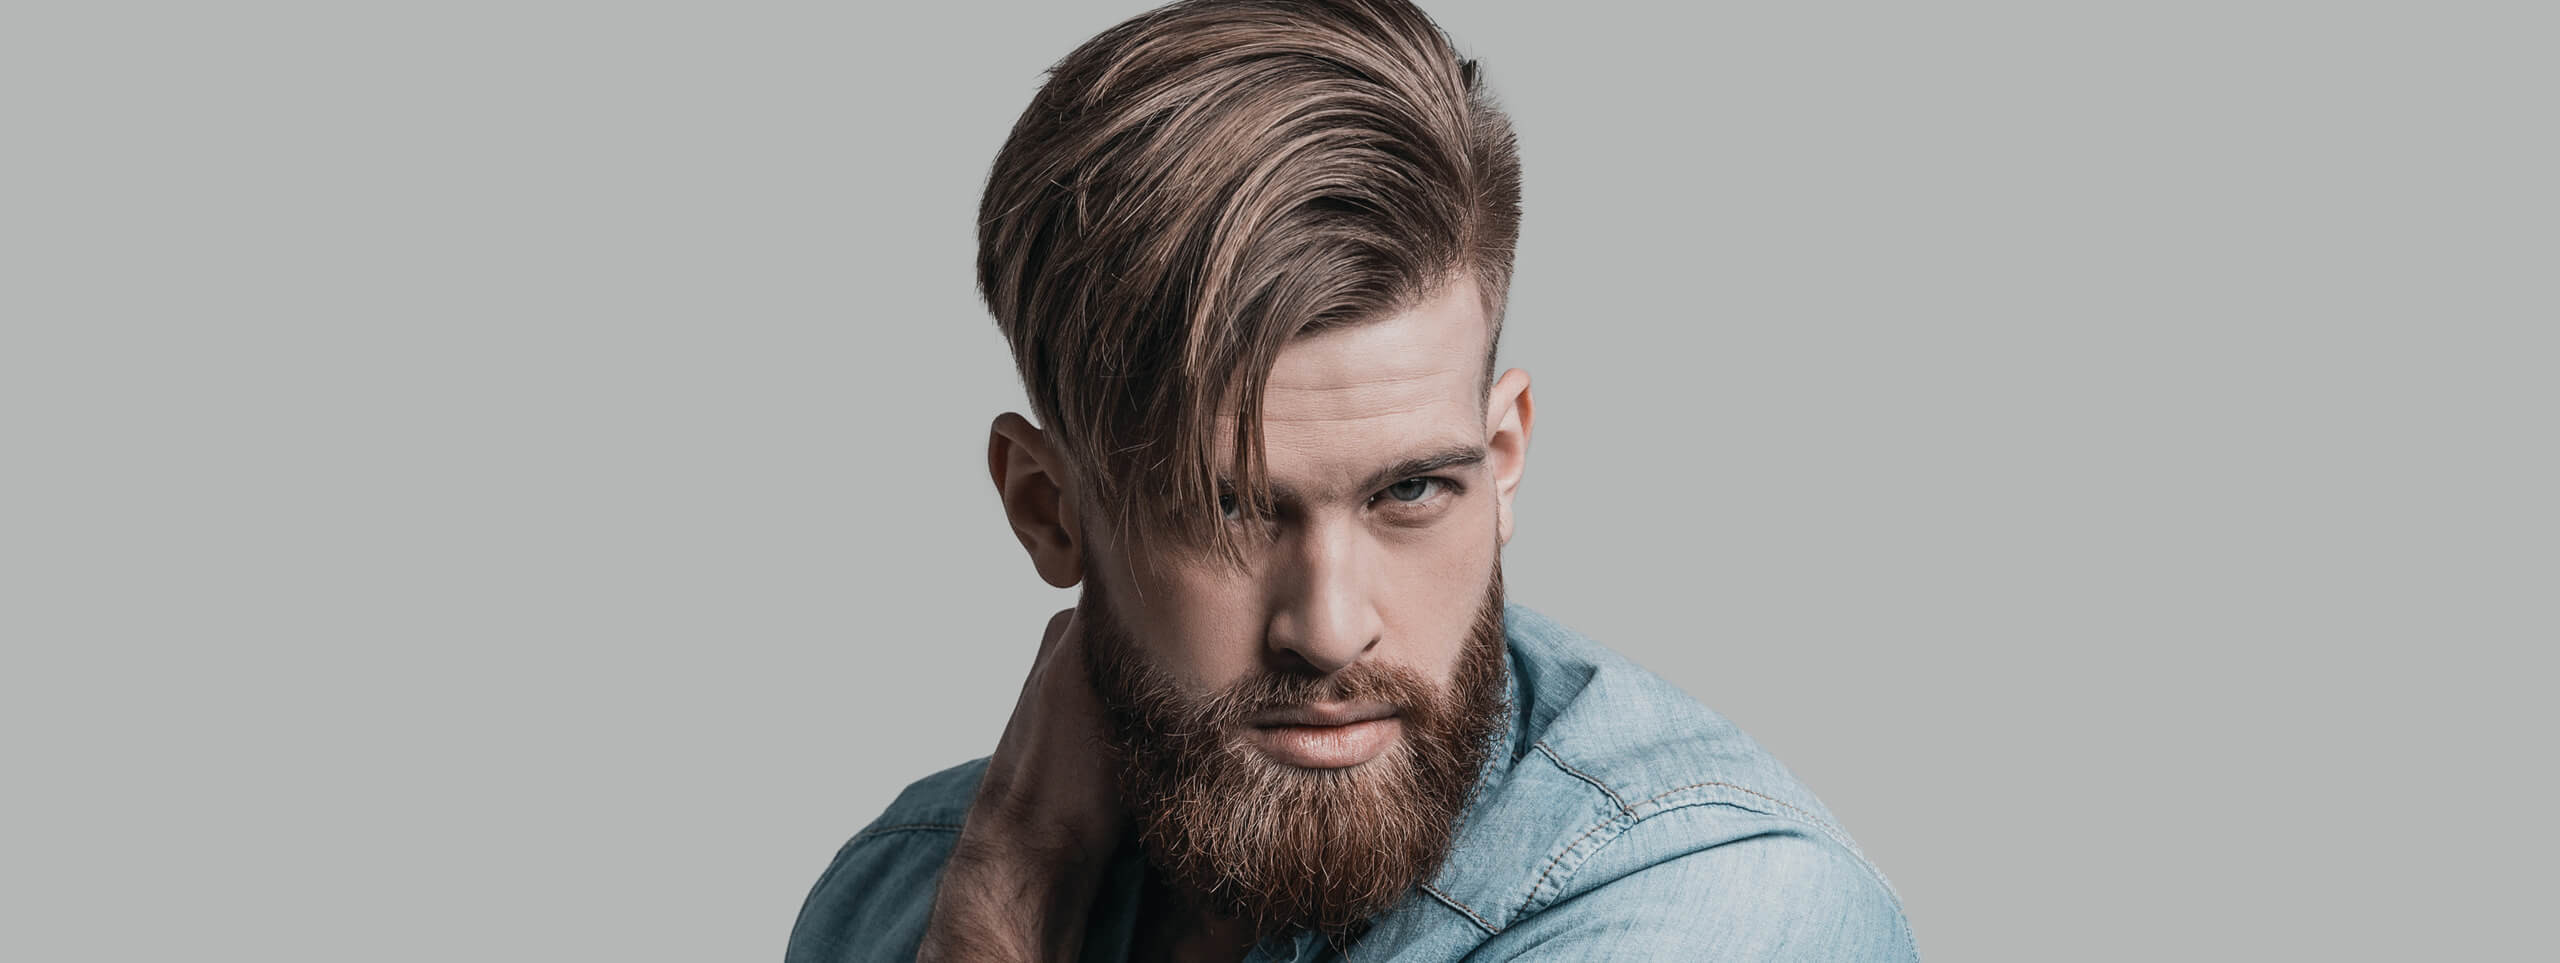 Hairstyle For Male
 Men s Undercut The Trend Hairstyle